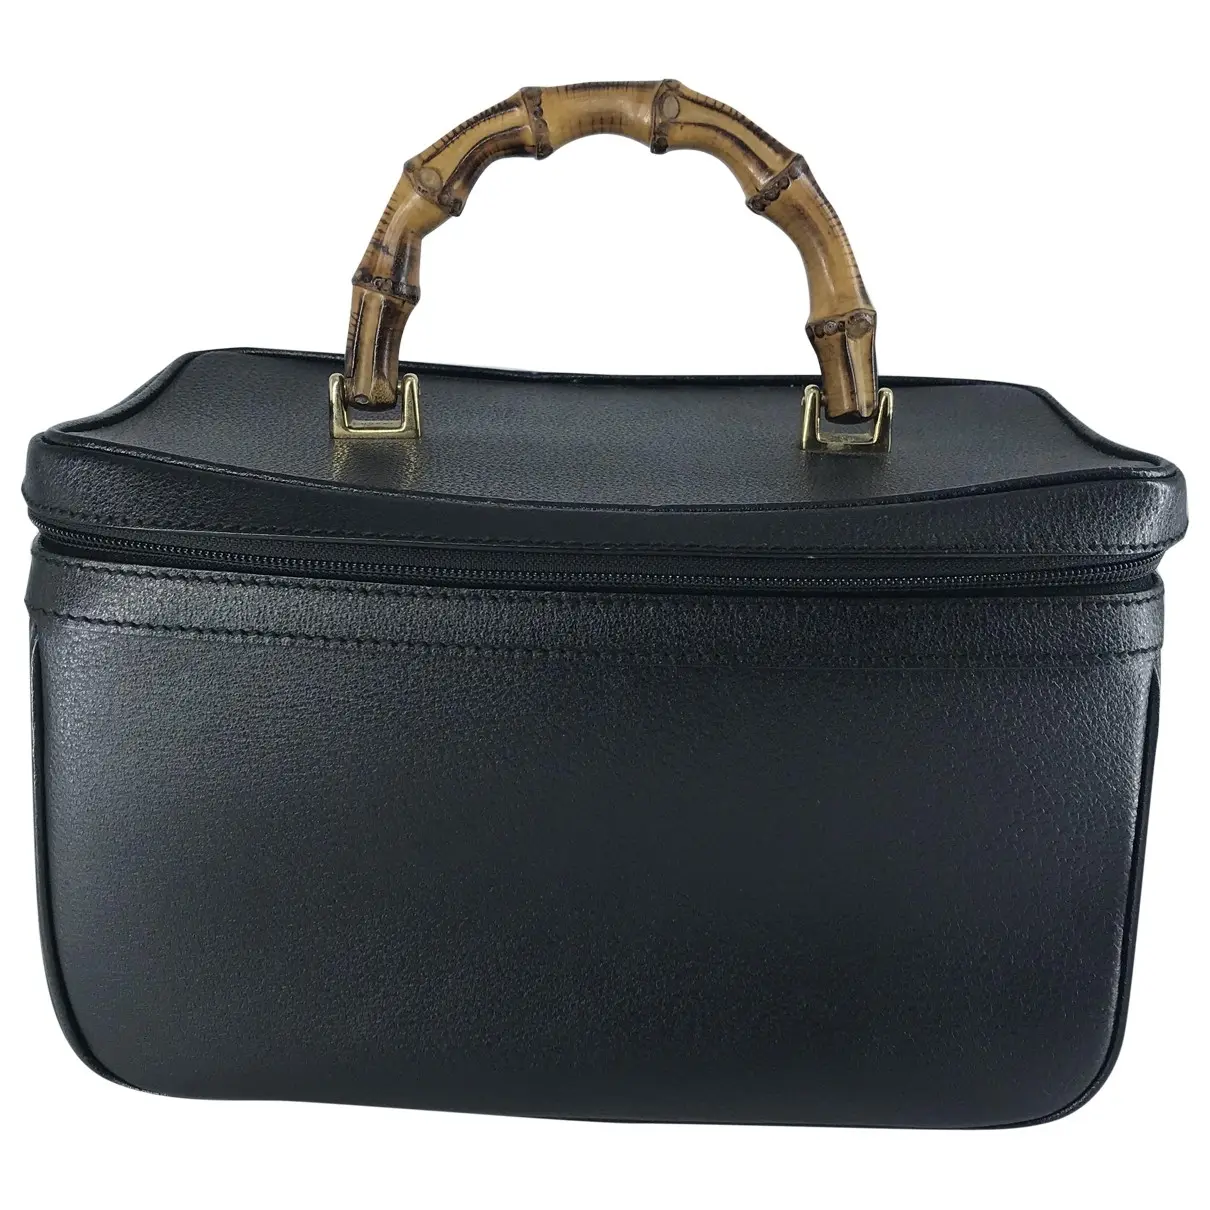 Bamboo leather vanity case Gucci